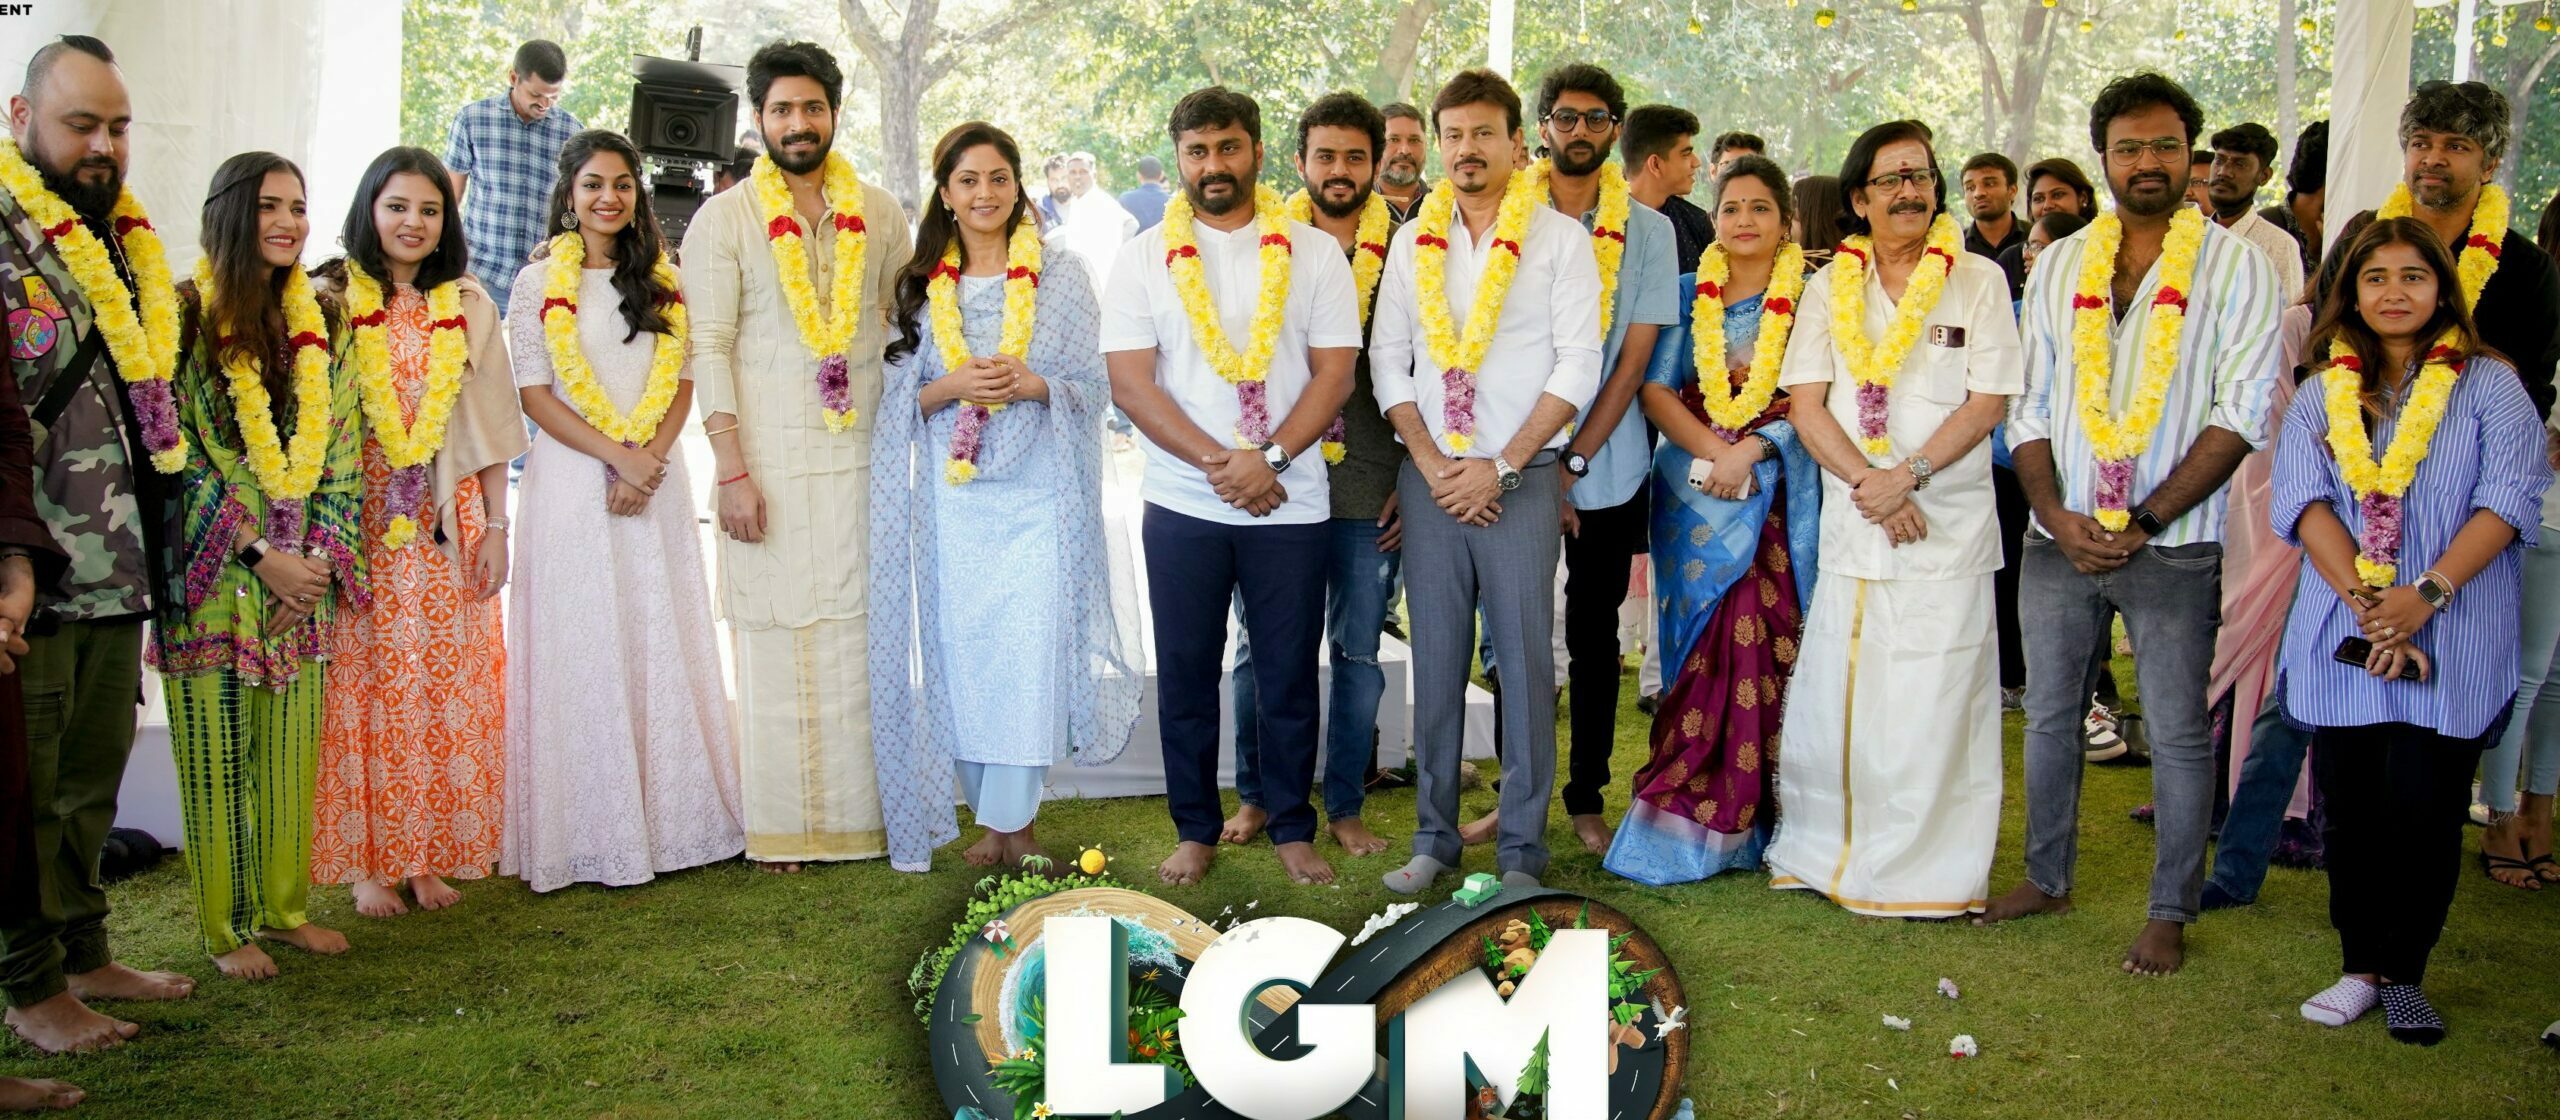 The launch of LGM. (Supplied)